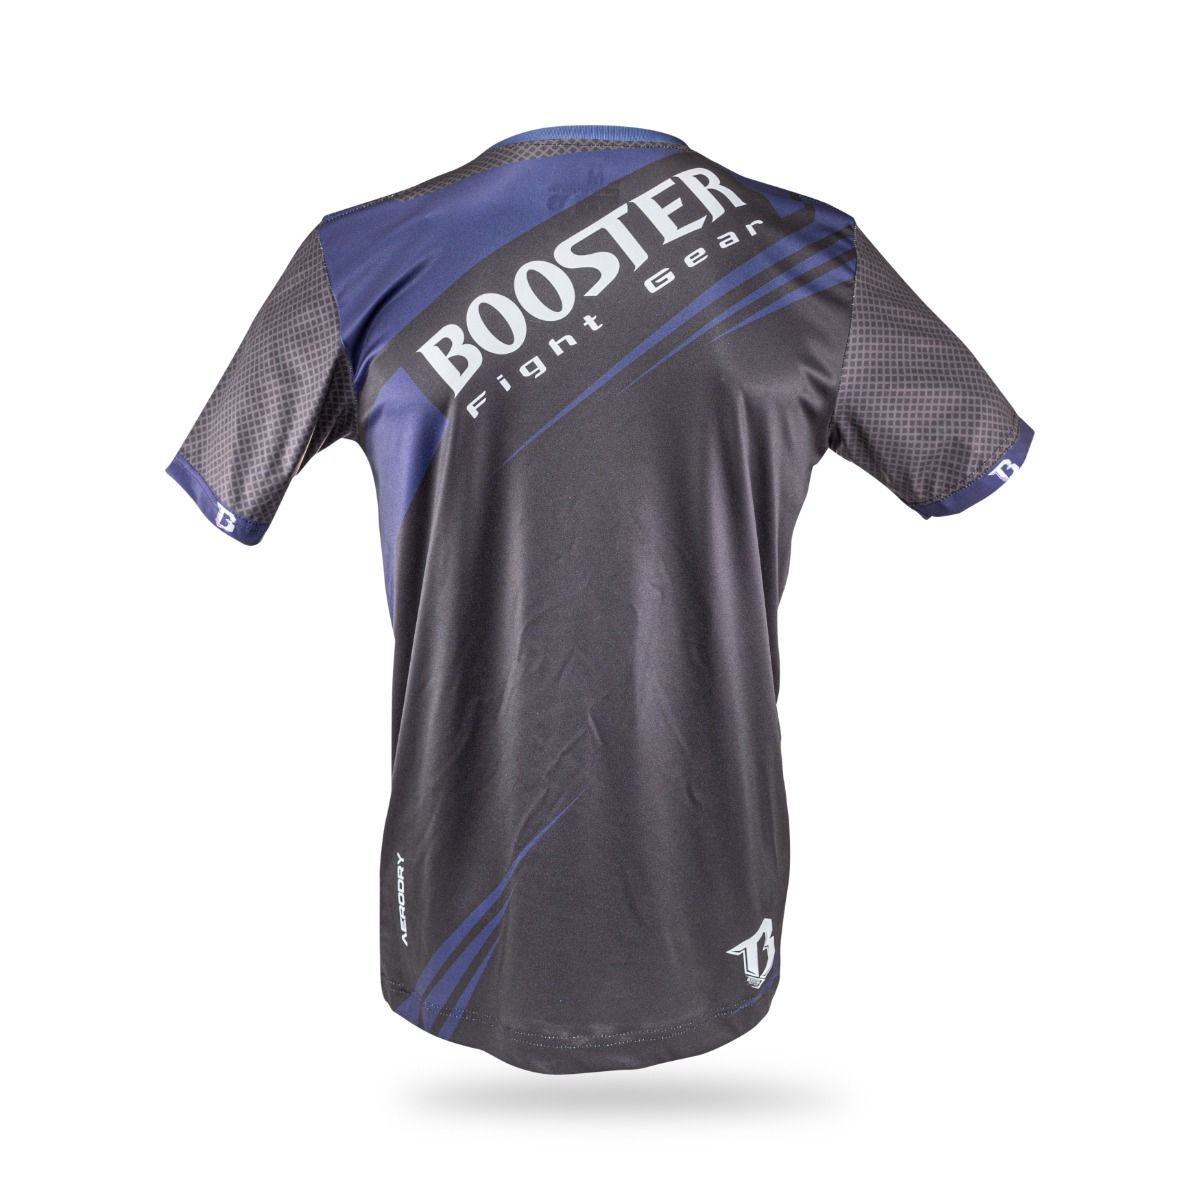 Booster explosion t-shirt active dry - Booster Fight Store